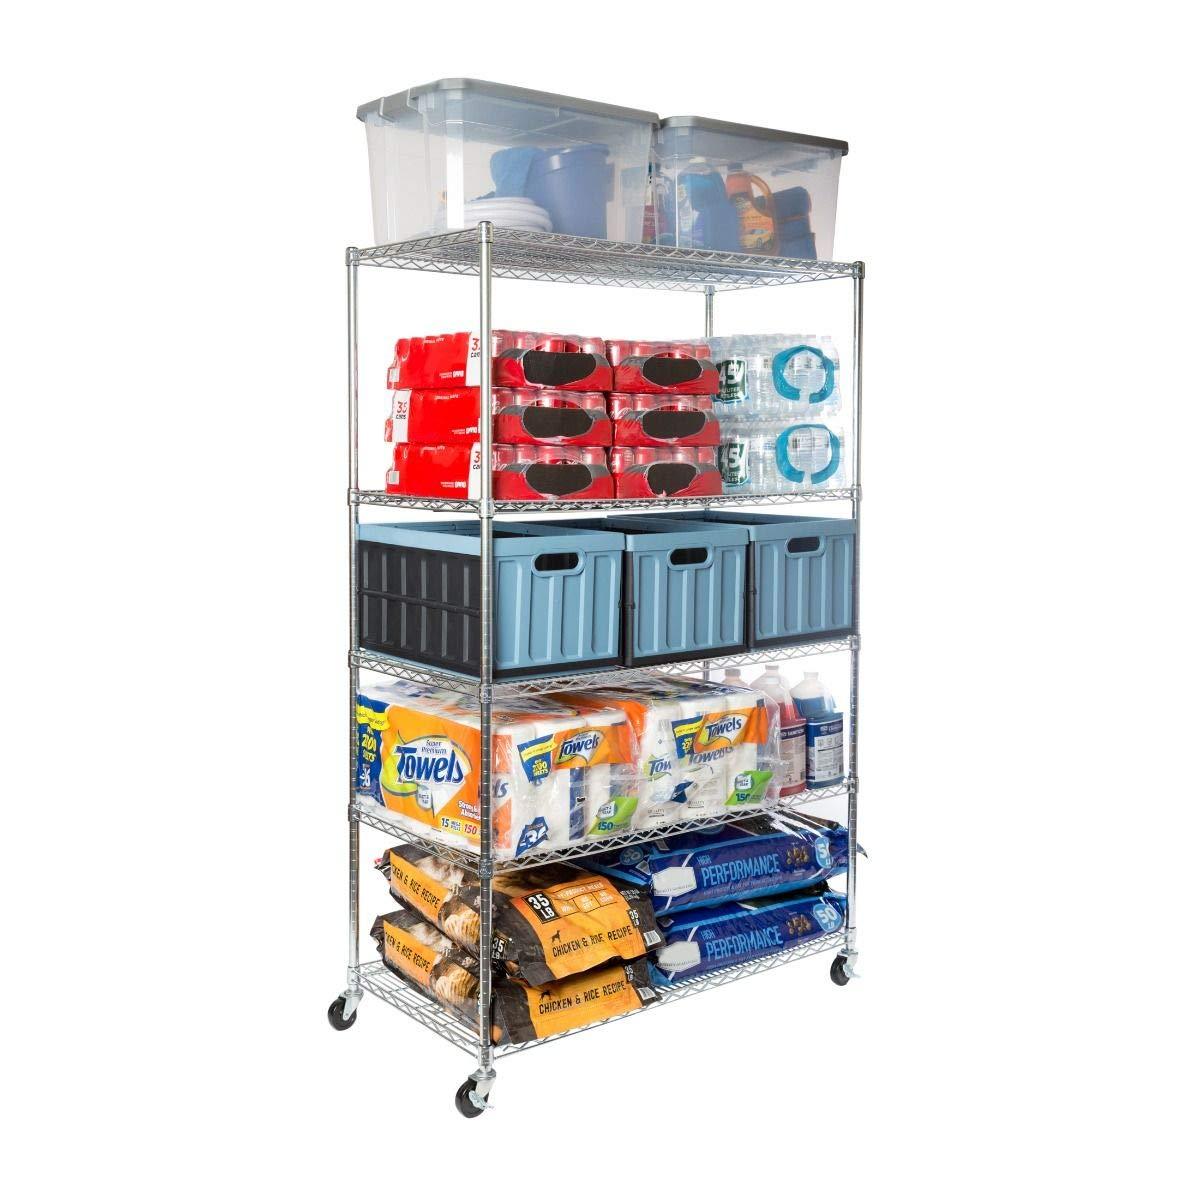 Seville Classics UltraDurable Commercial-Grade 5-Tier NSF-Certified Steel Wire Shelving with Wheels 48" W x 24" D x 72" H Silver